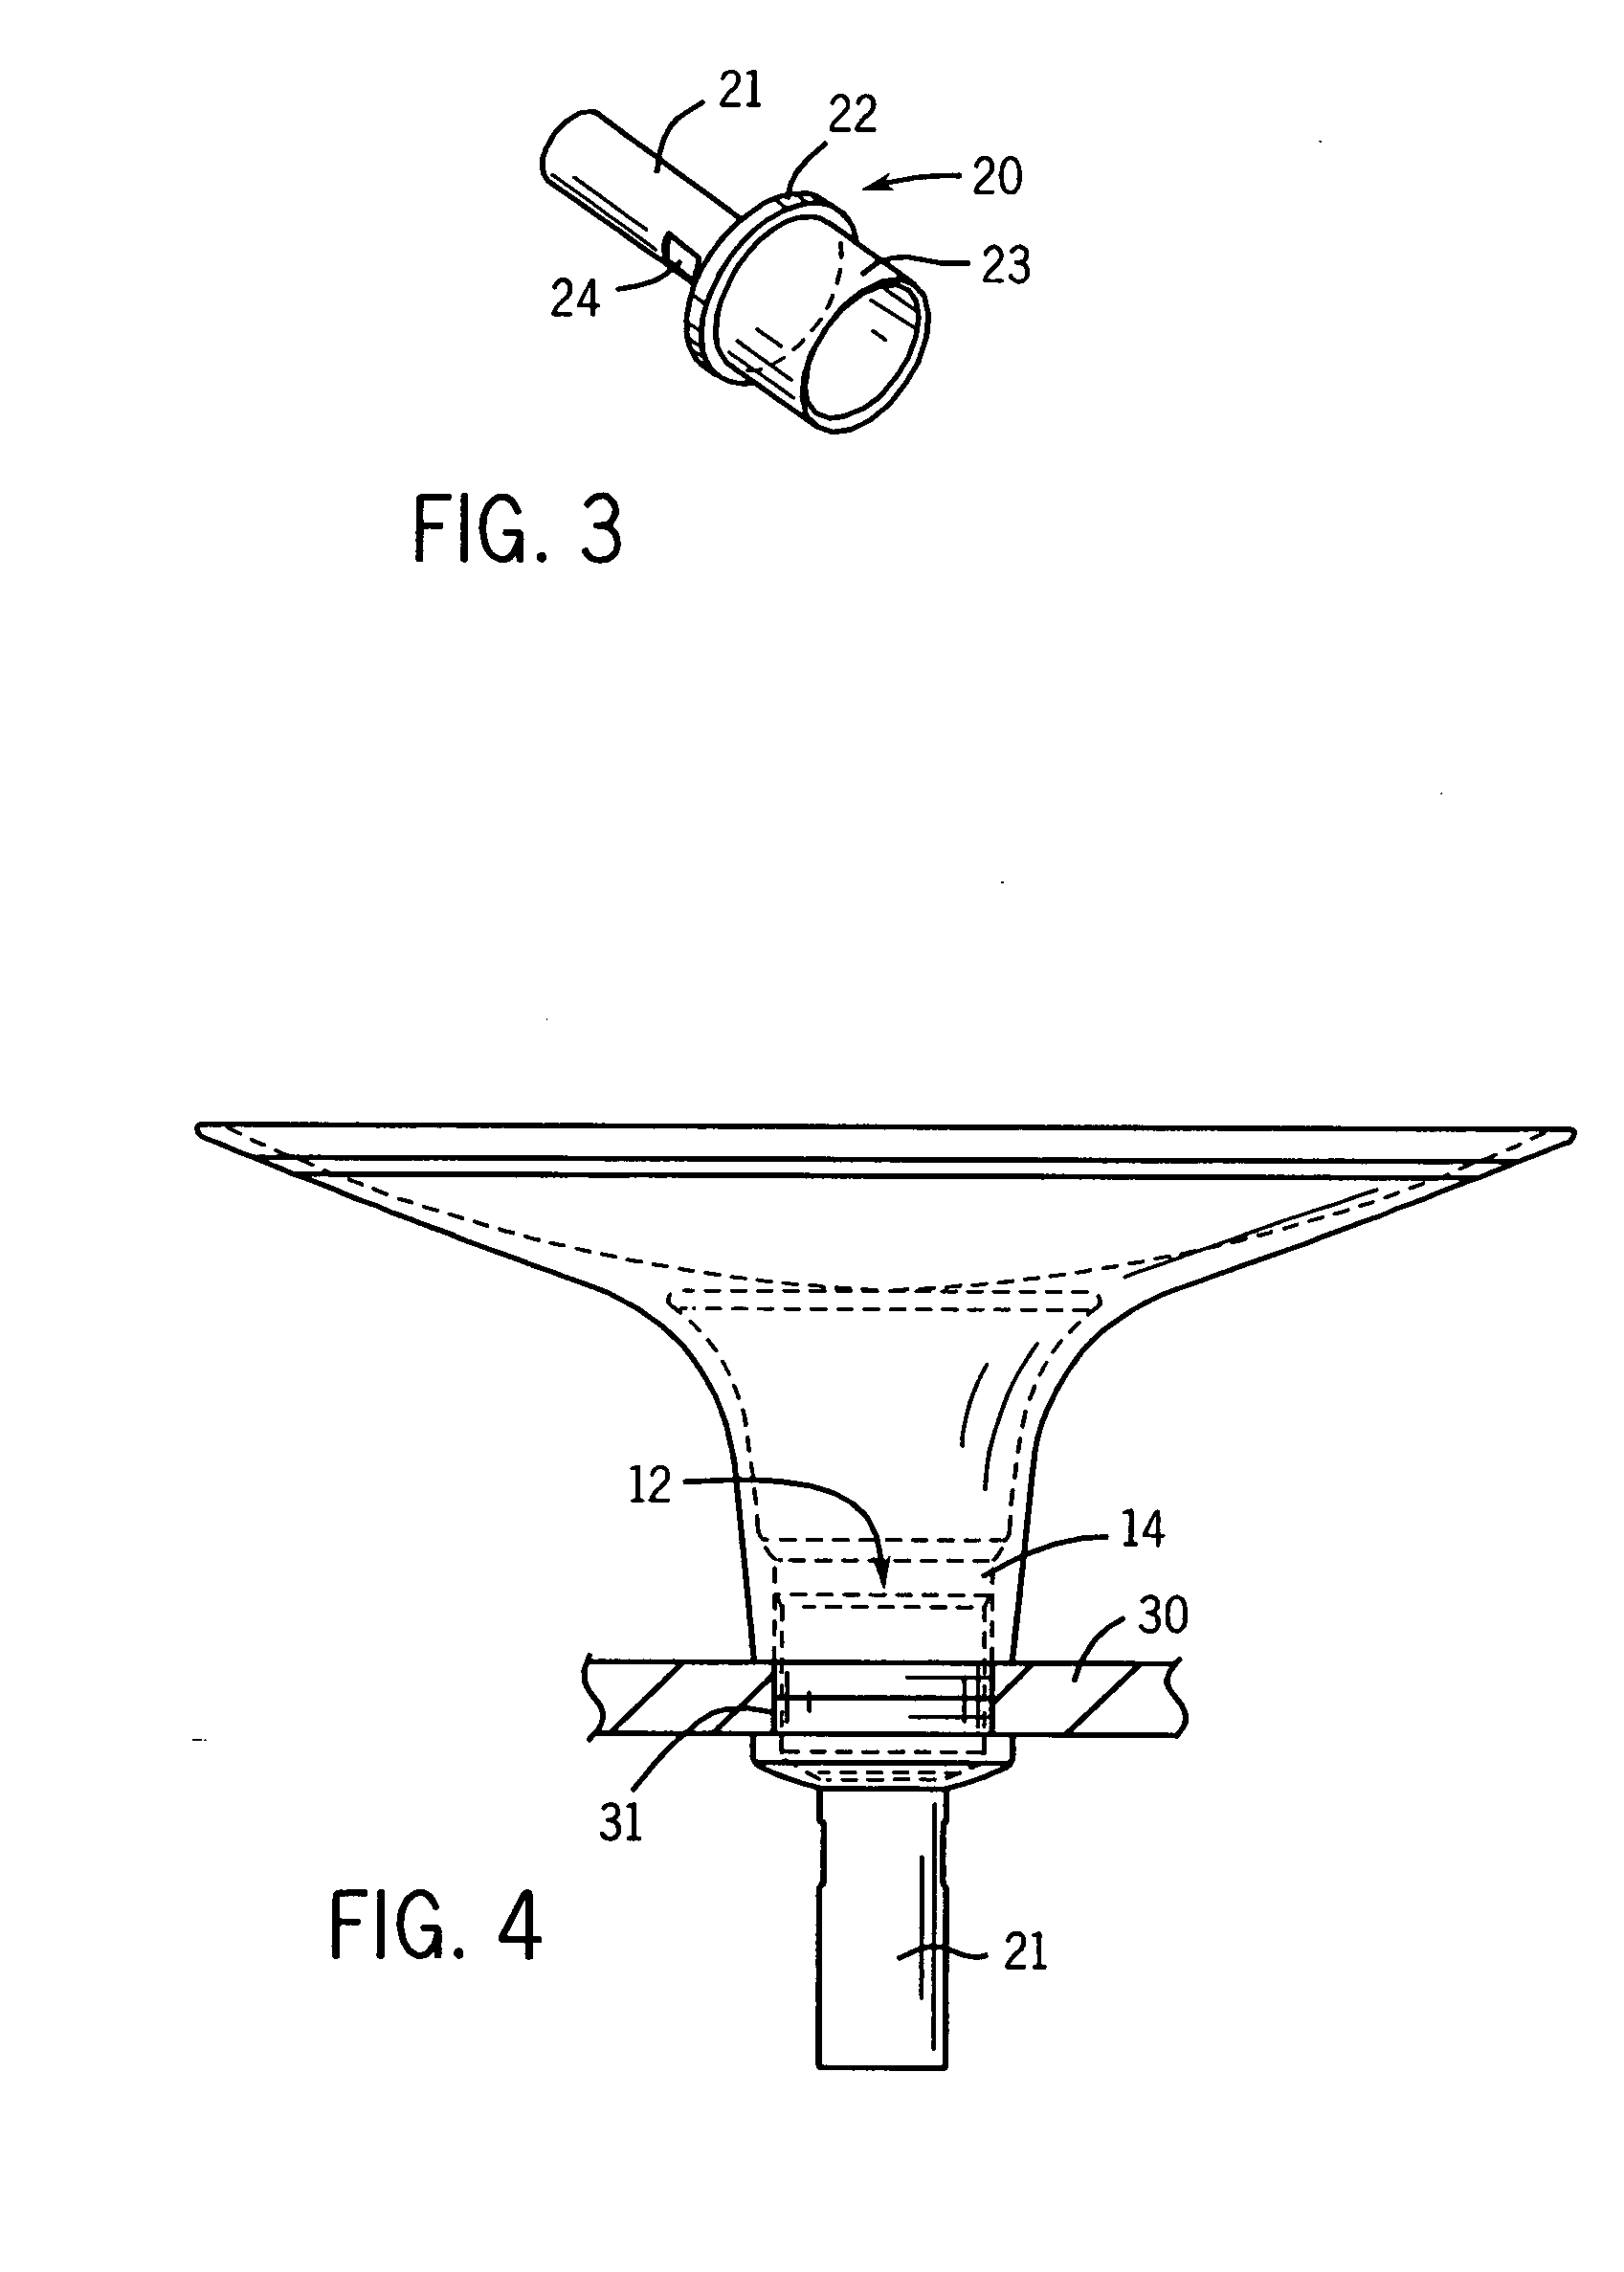 Drain outlet with integral clamp for use with a plumbing fixture